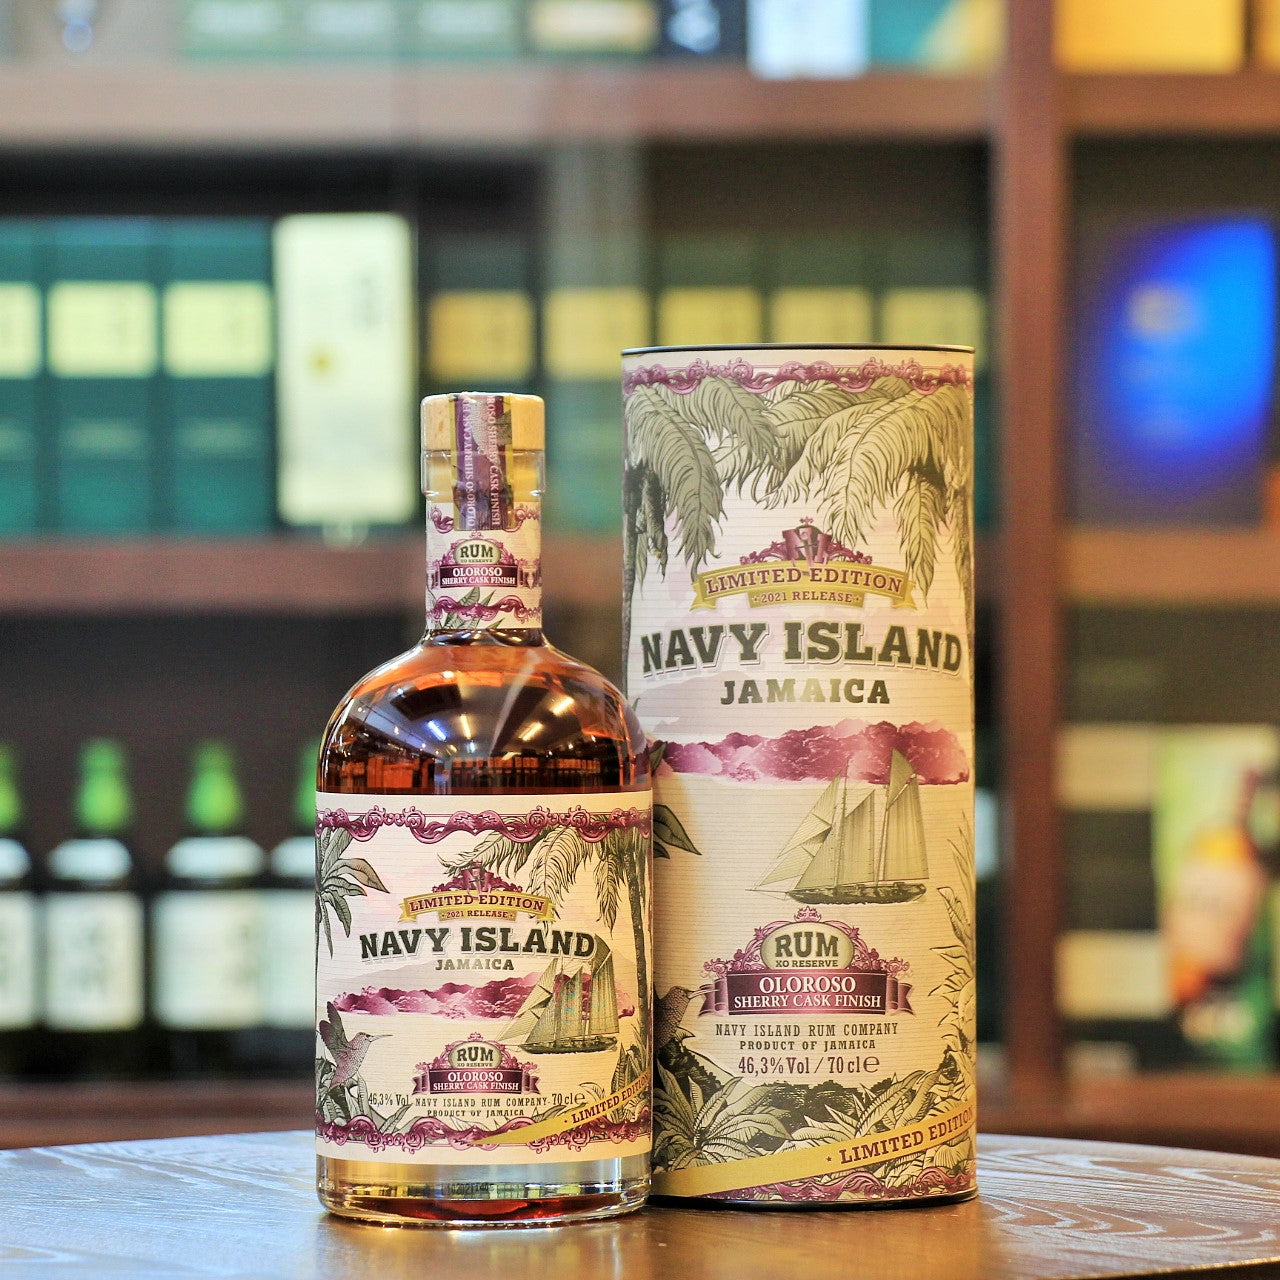 A 100% pure Jamaican Pot Still rum which has been finished for at least 12 months in Ex-Oloroso Sherry Casks. Navy Island is a small tropical island off the coast of Port Antonio, Jamaica. In the 18th century, the island was used by the British Royal Navy (hence the name). 